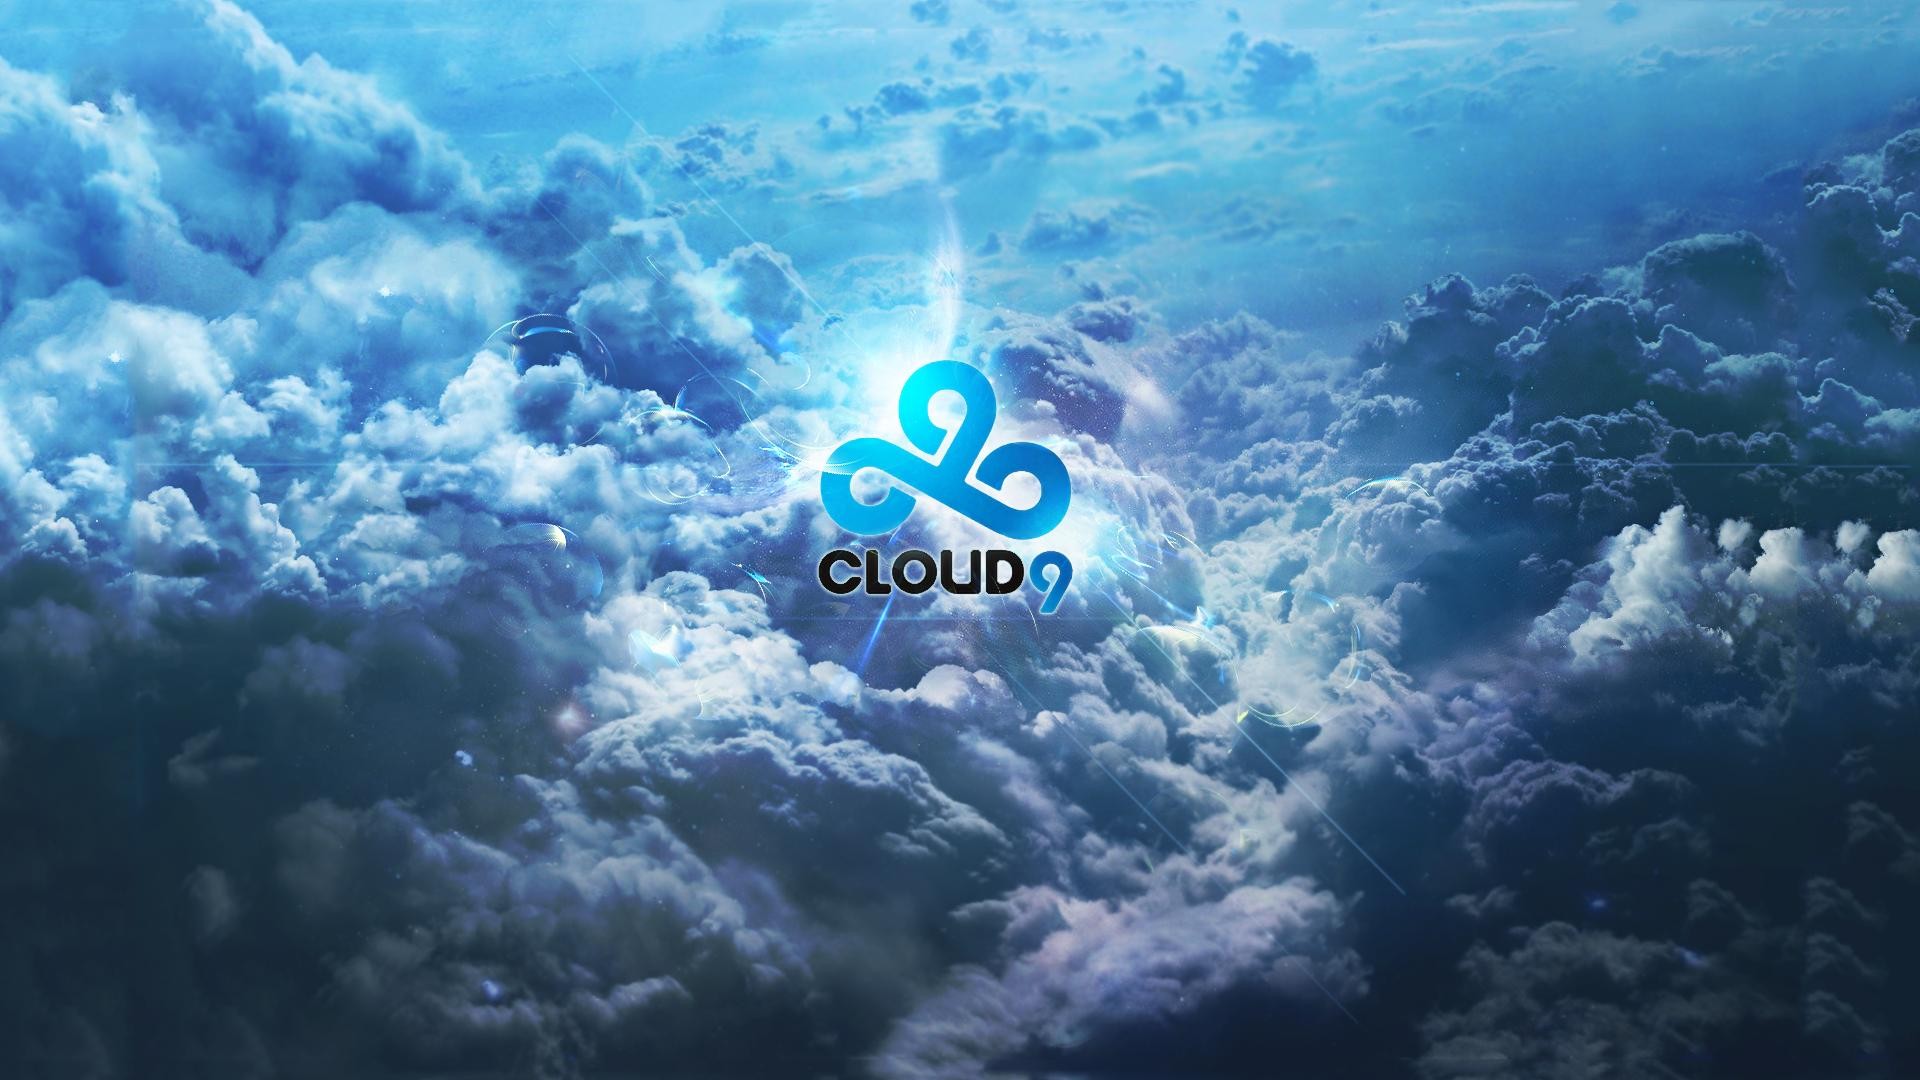 Video Games, Counter Strike - Cloud 9 Wallpaper For Iphone , HD Wallpaper & Backgrounds